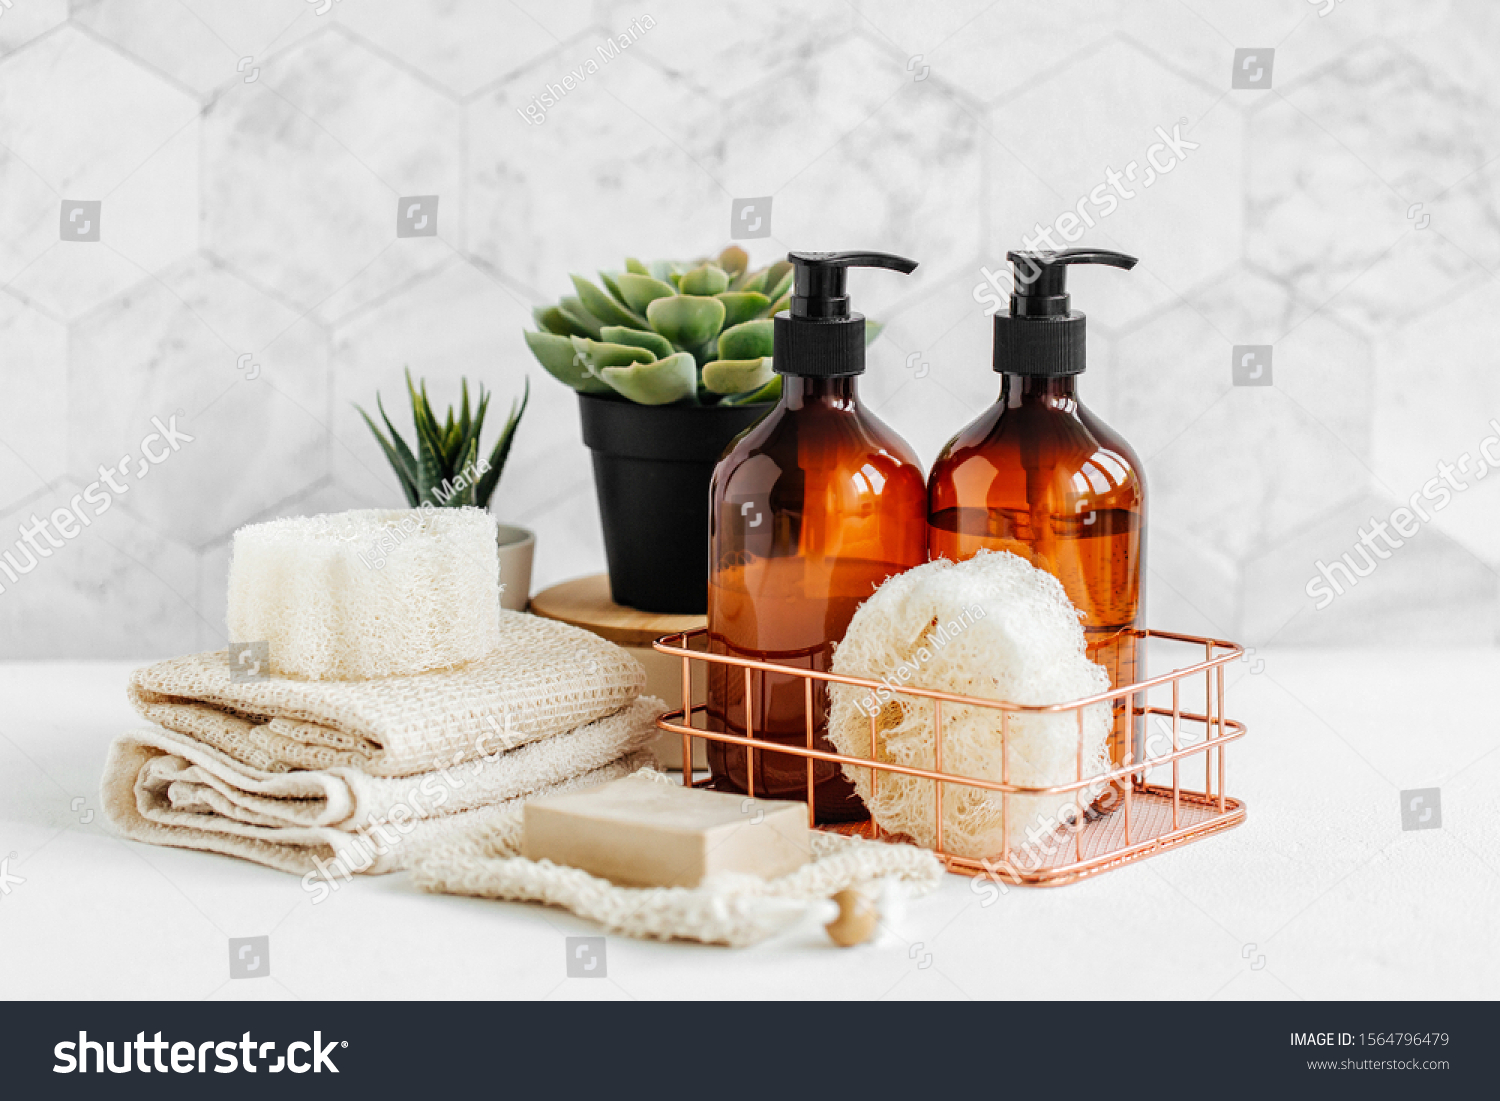 Soap and shampoo bottles and cotton towels with green plant on white table inside a bathroom background. #1564796479